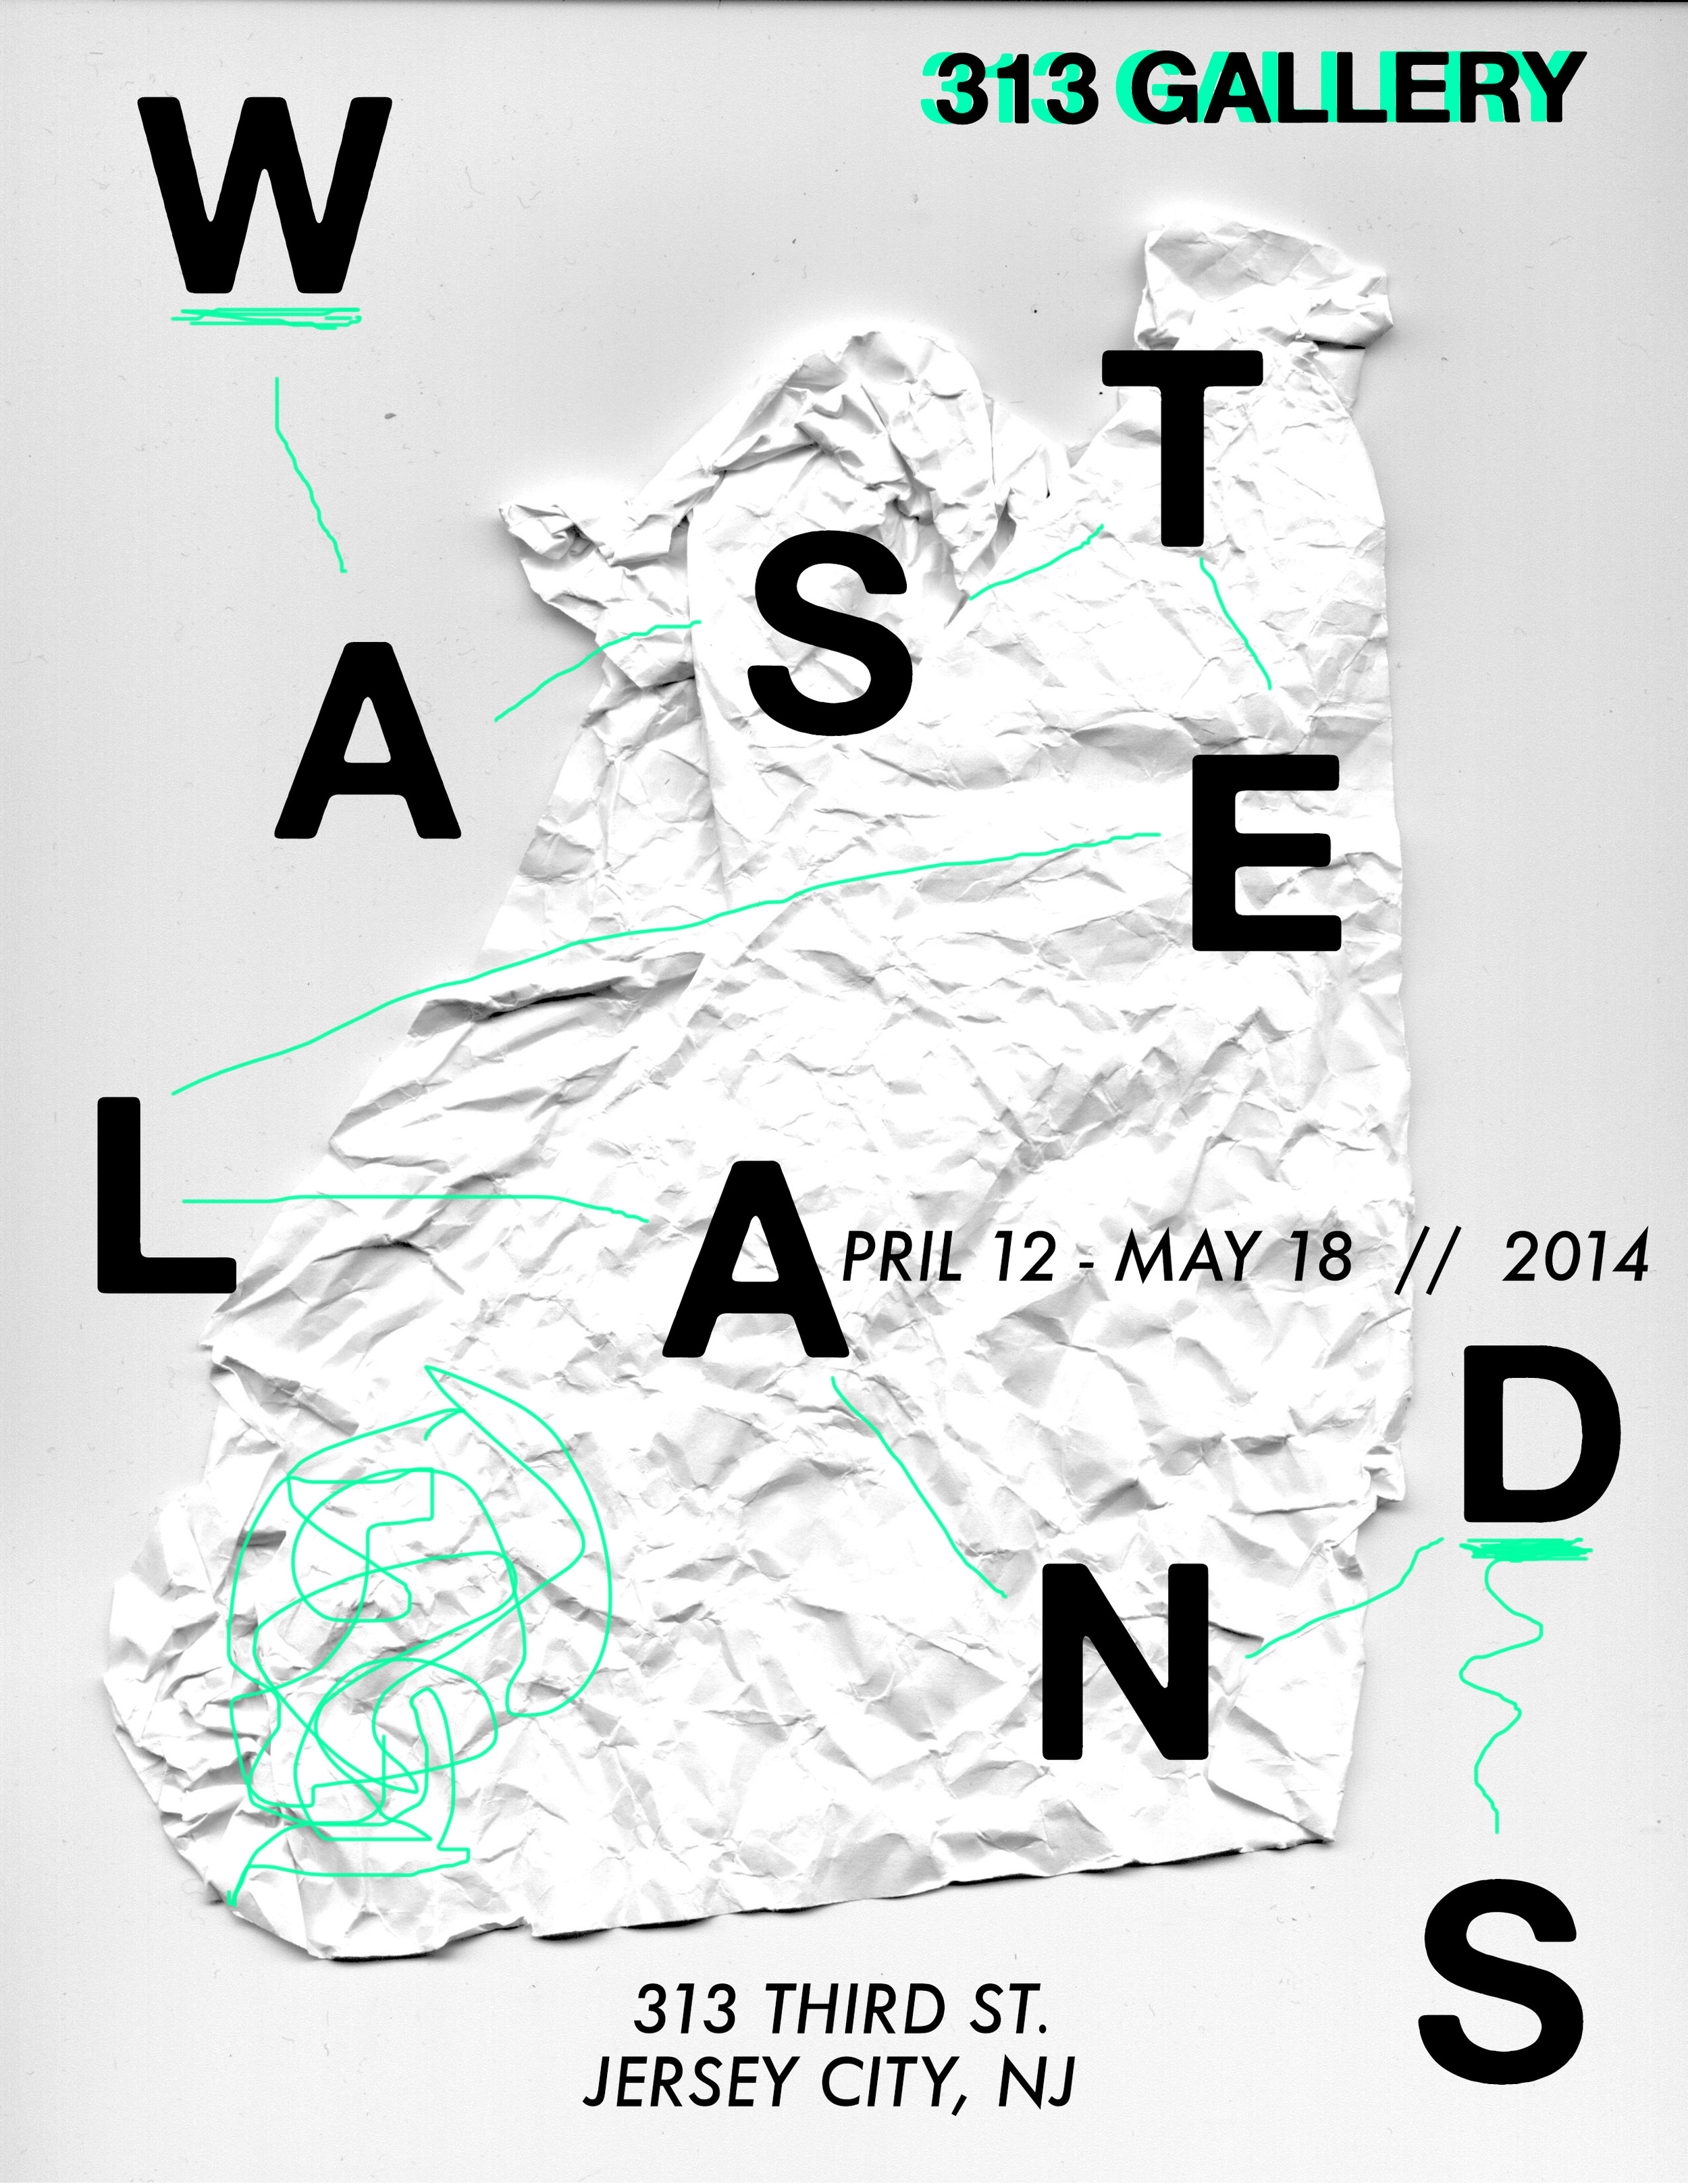  Exhibition poster designed for 313 Gallery's  Wastelands  exhibition, Spring 2014. 